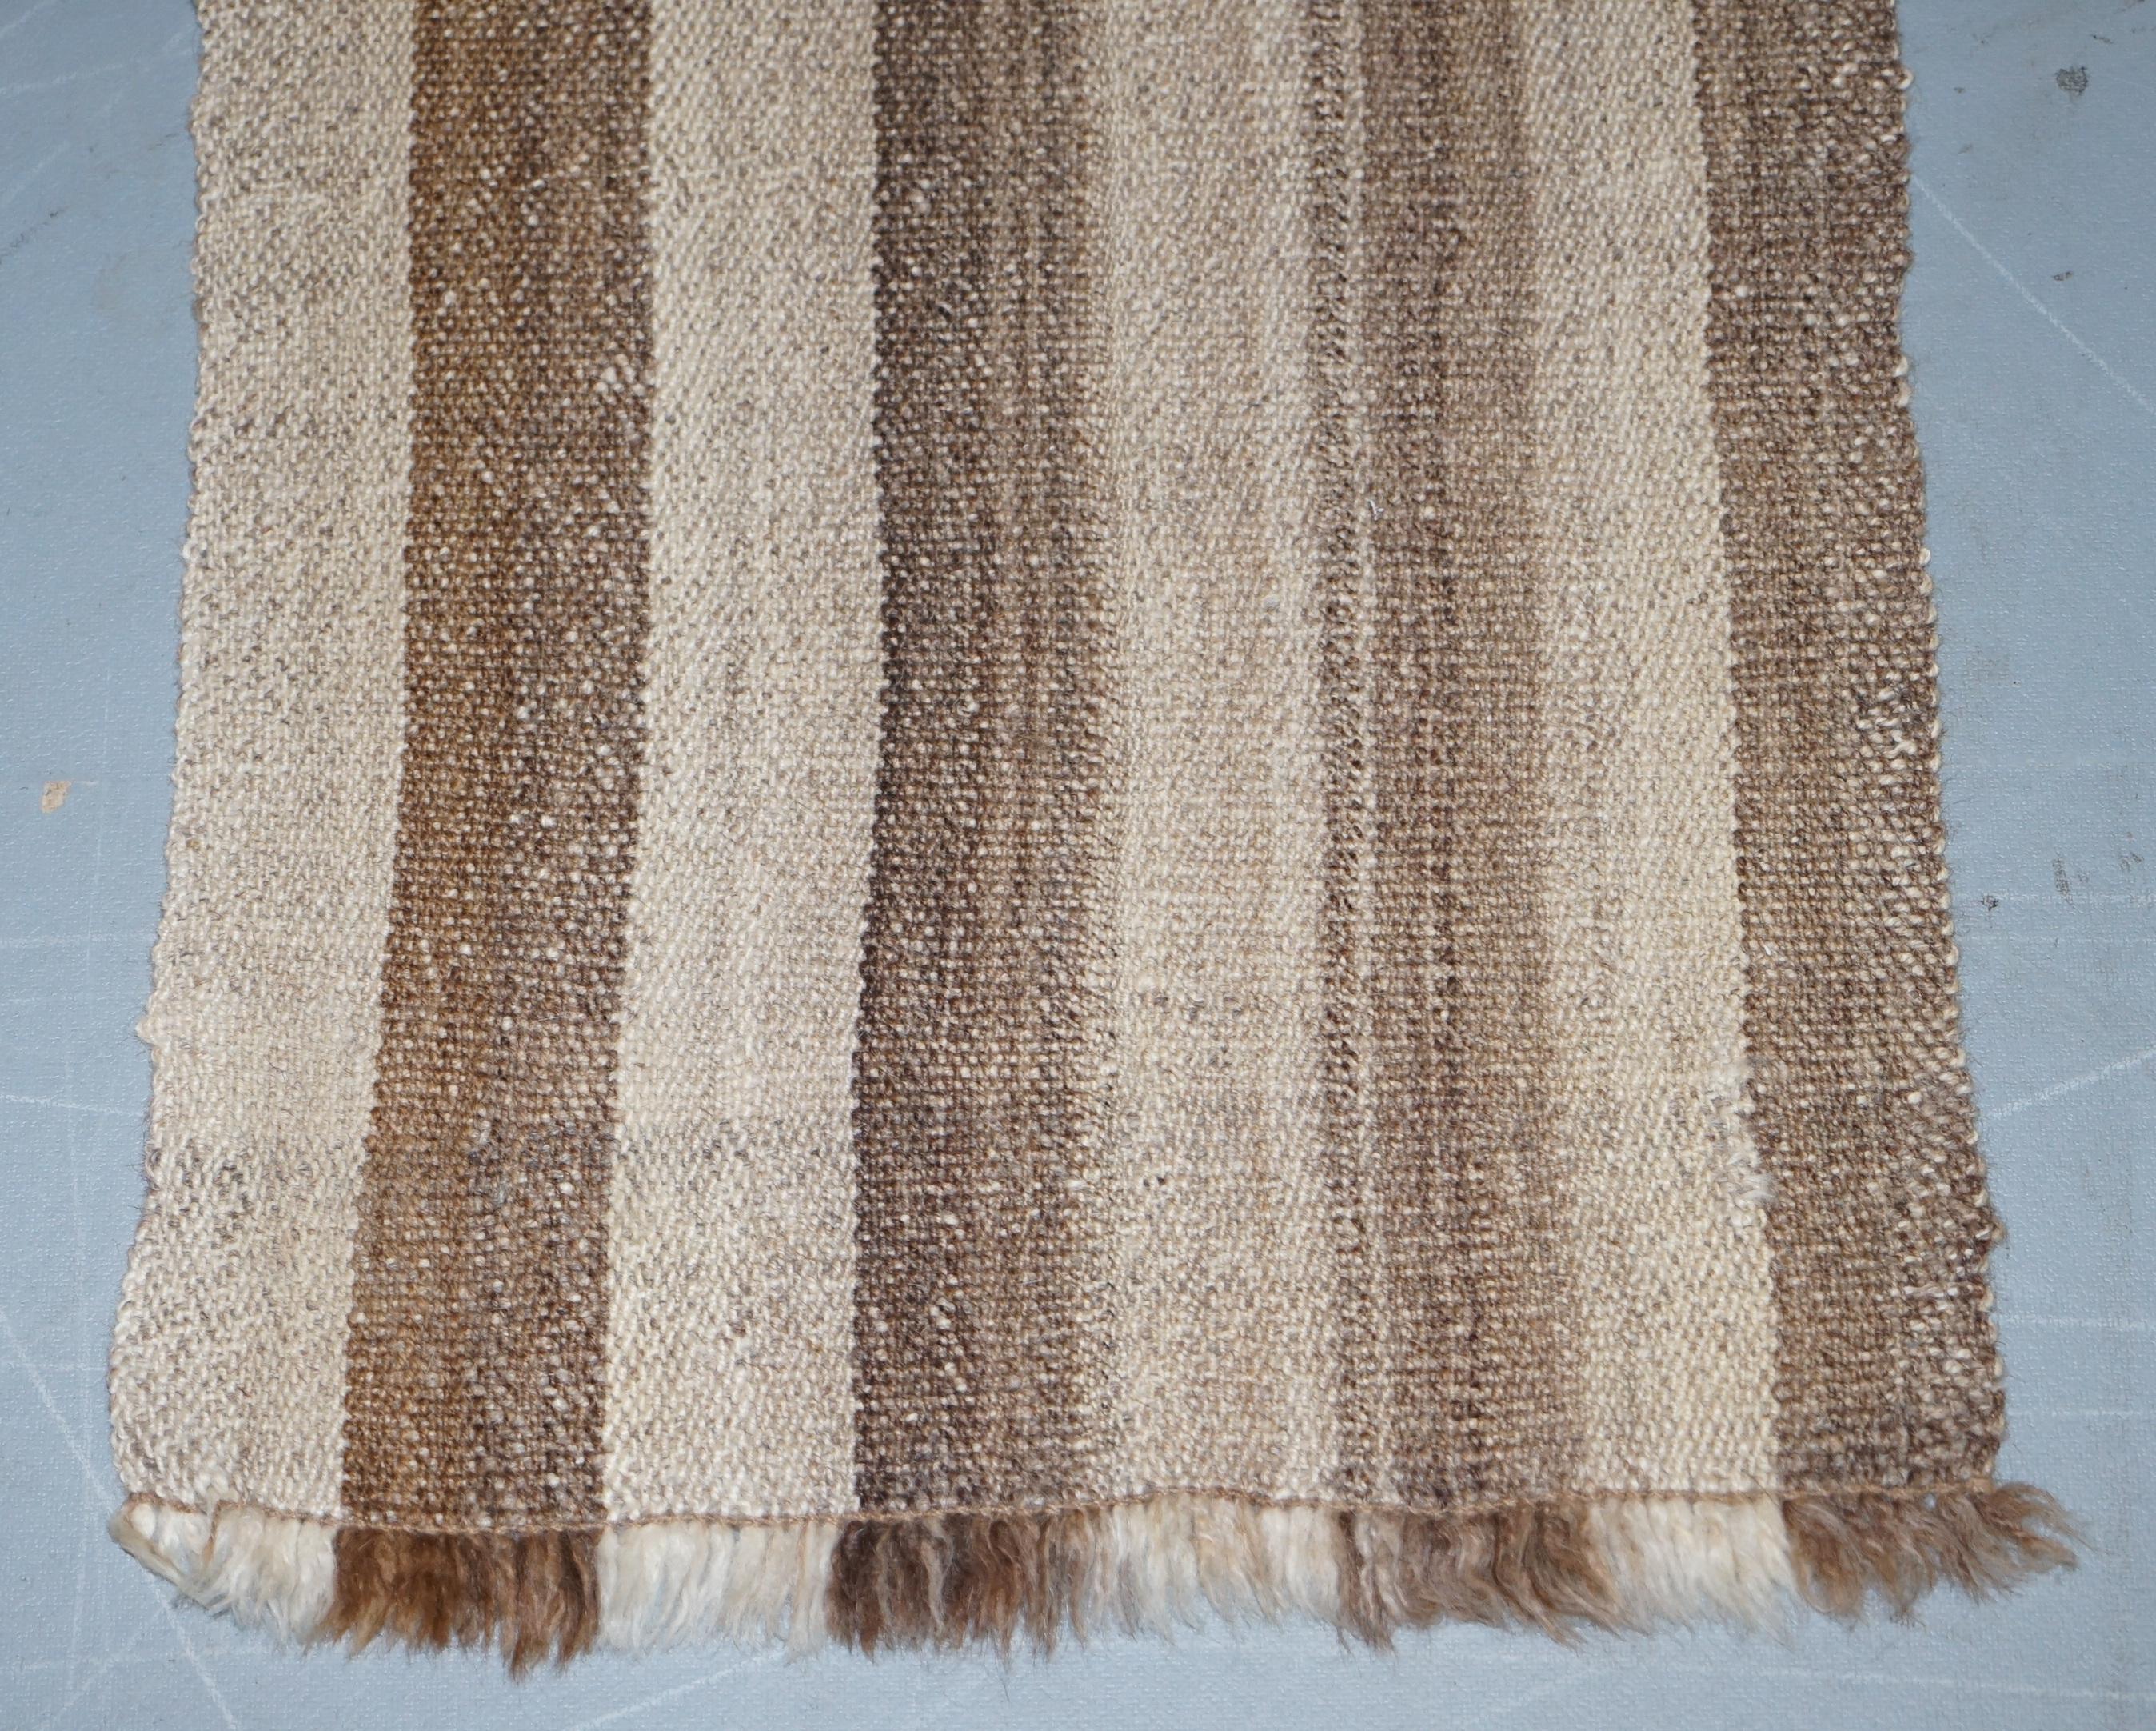 Hand-Crafted Stunning Vintage Striped Stripy Kilim Wall Hanging Striped Throw Can Be Rug